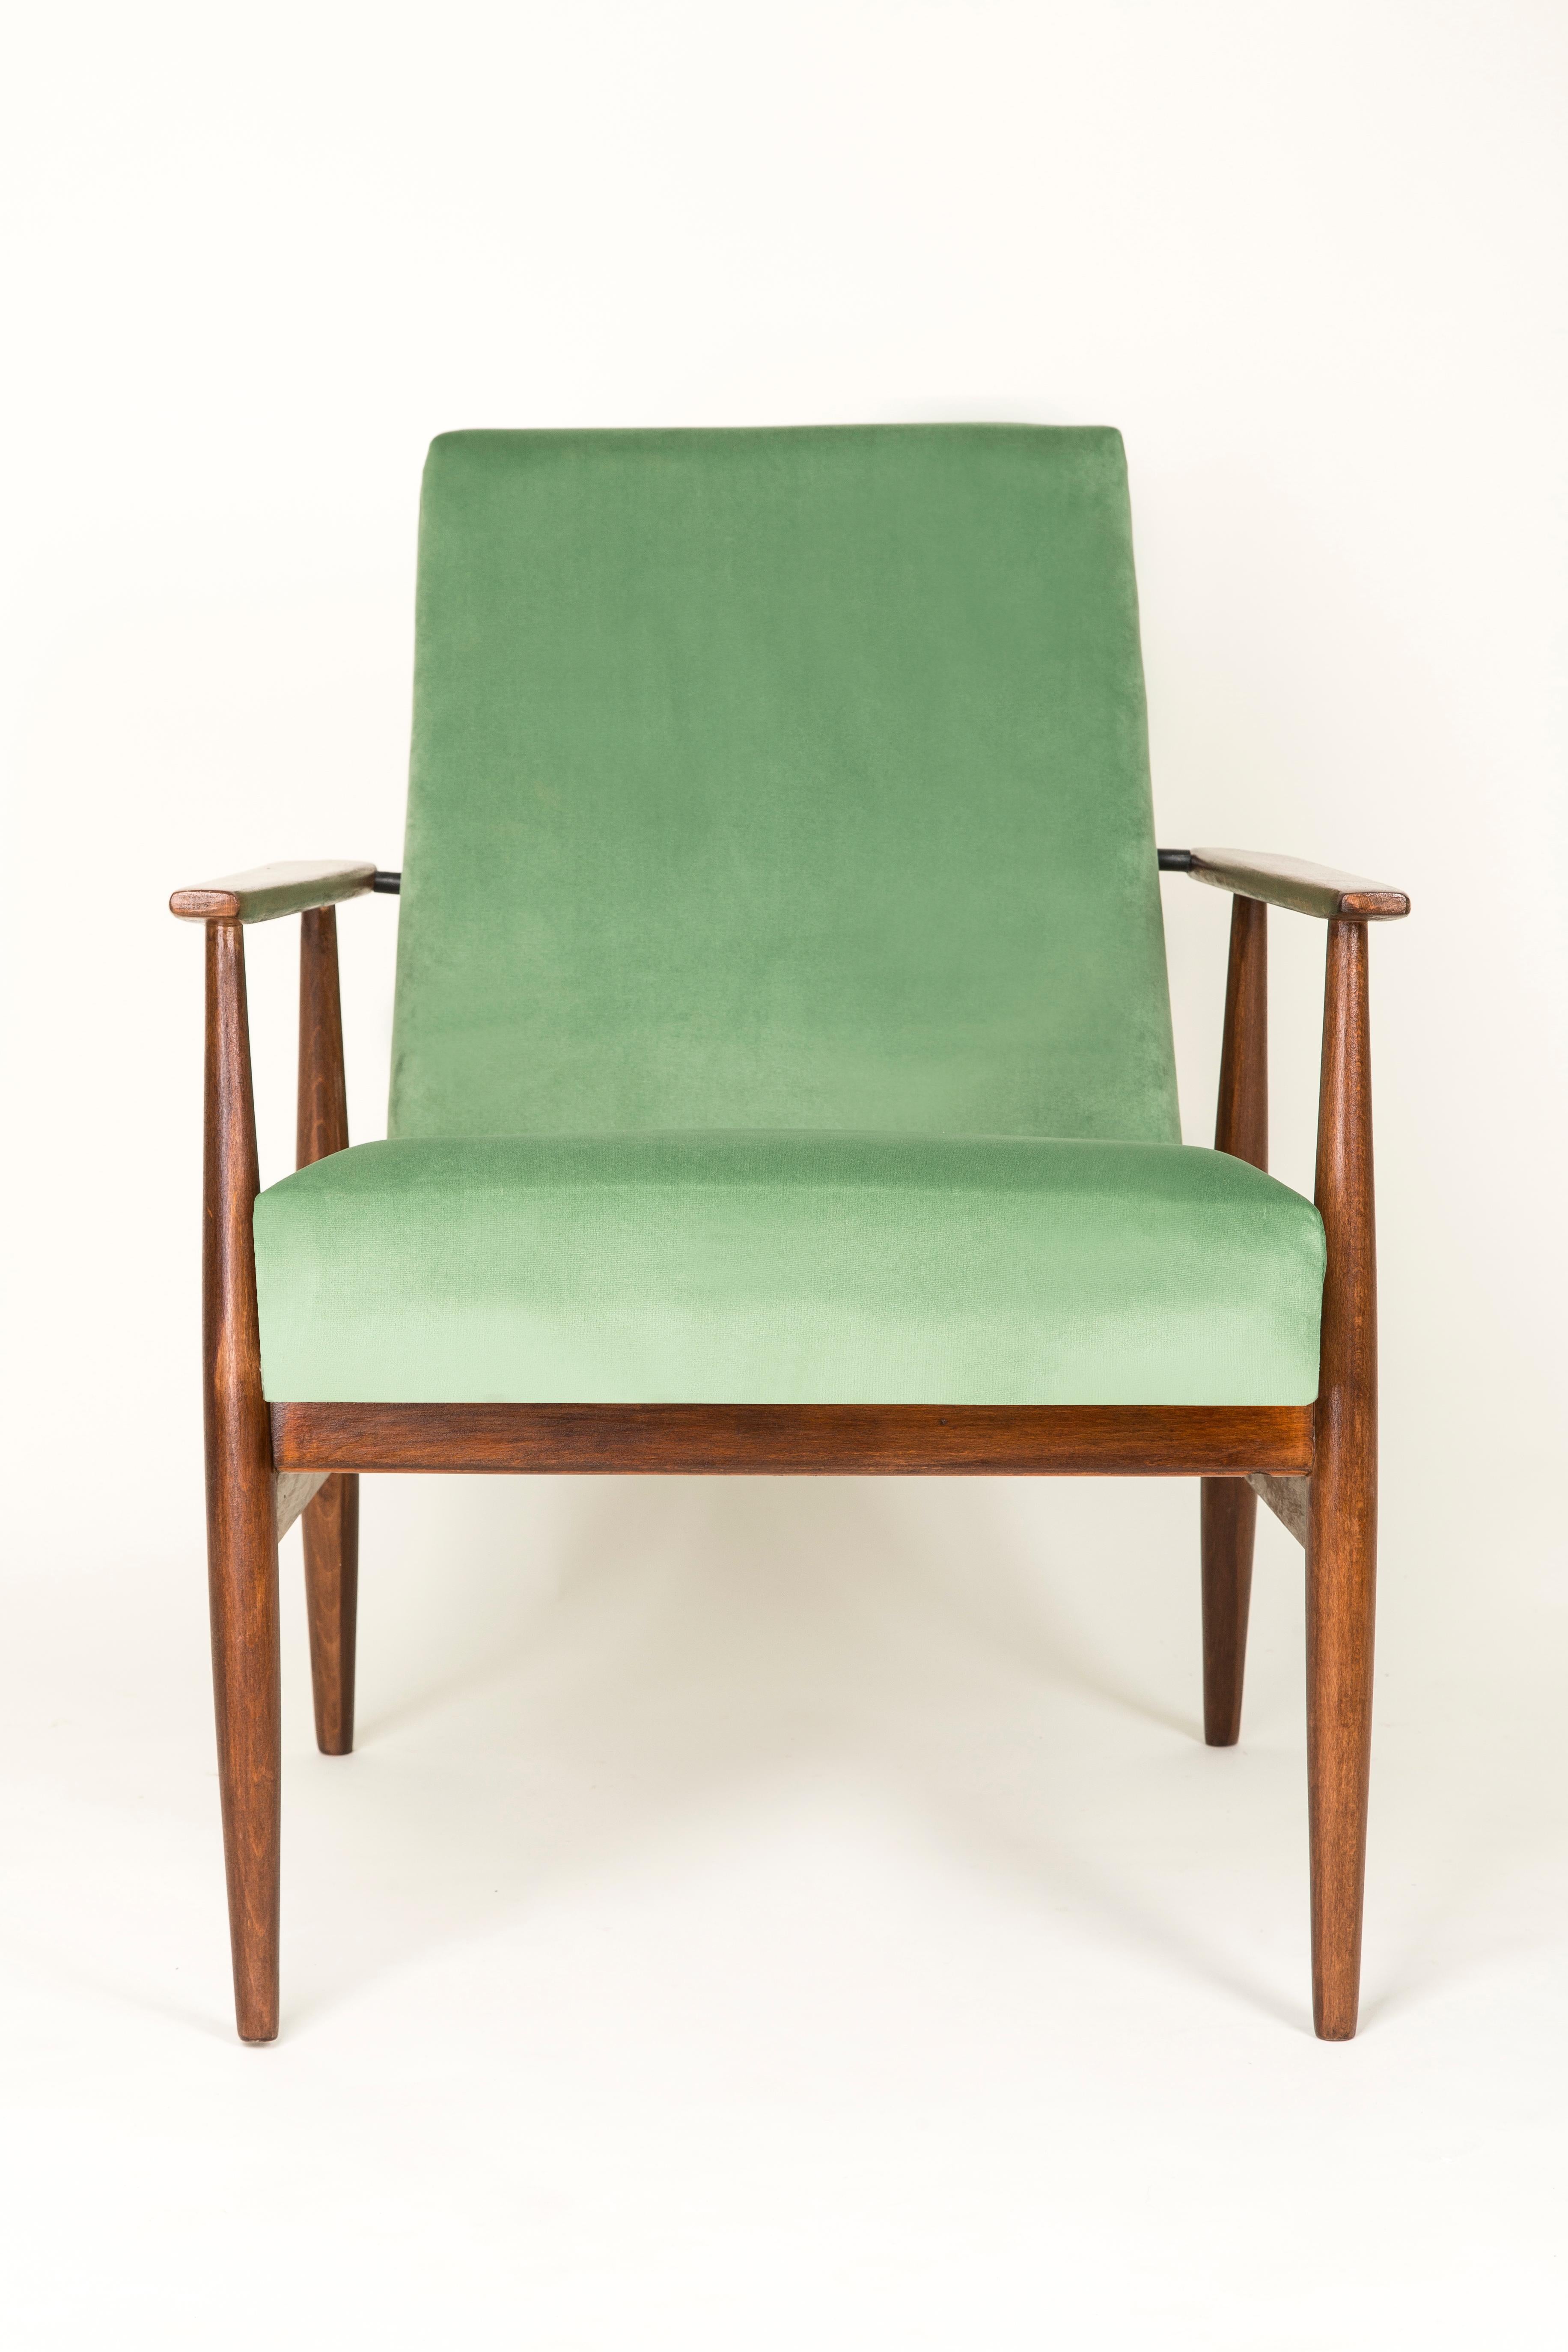 20th Century Pair of Mint Green Dante Armchairs, H. Lis, 1960s For Sale 1